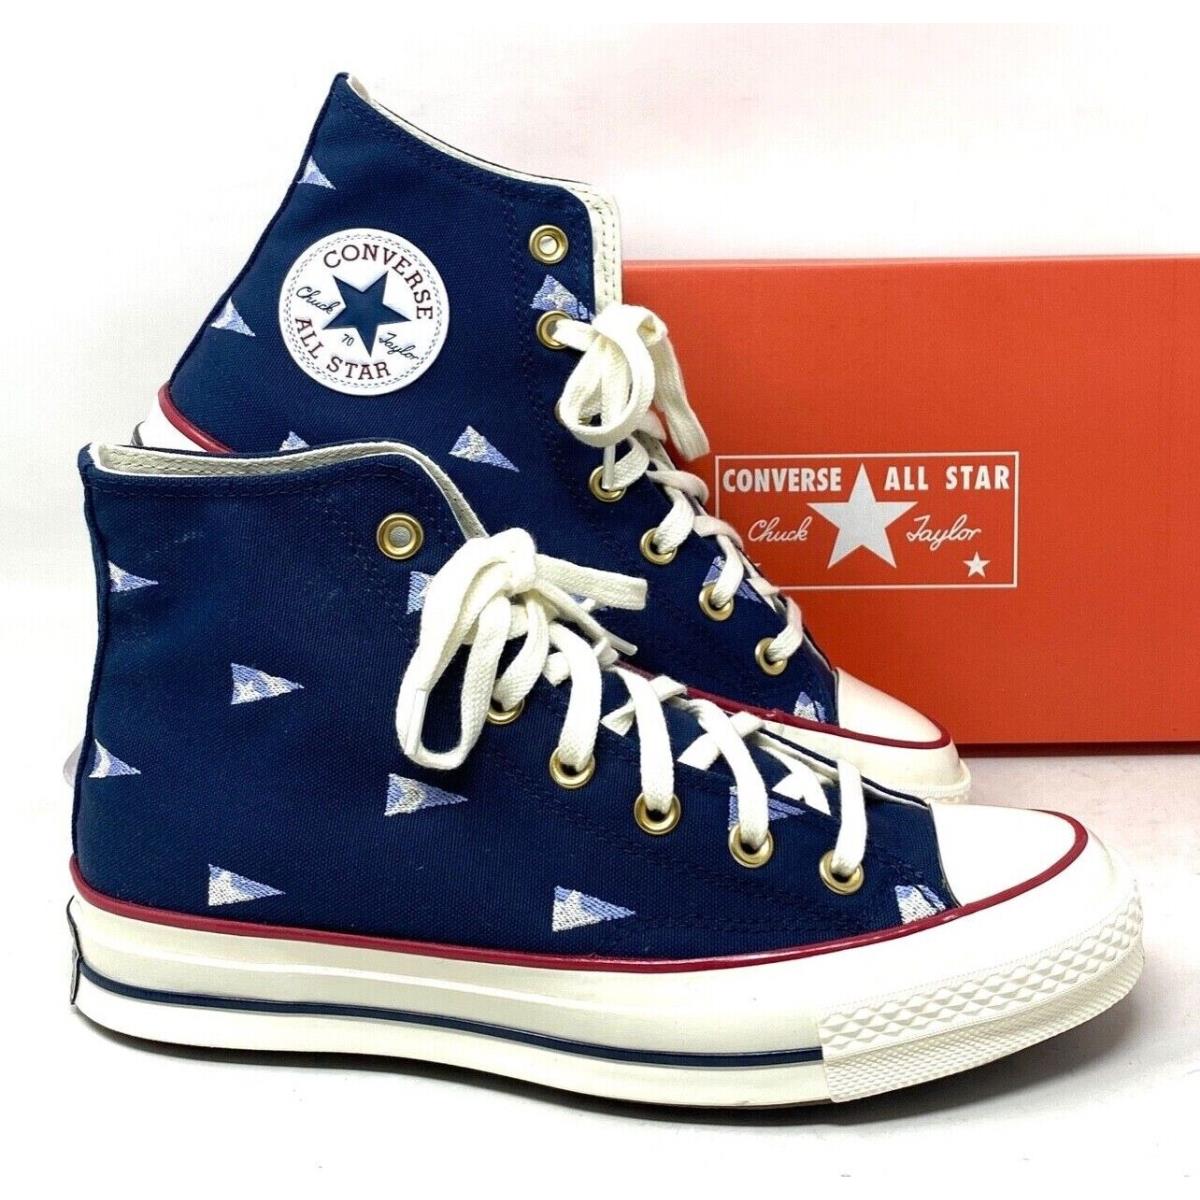 Converse Chuck 70 Shoes For Women Skate Navy Canvas High Top Sneakers A04965C